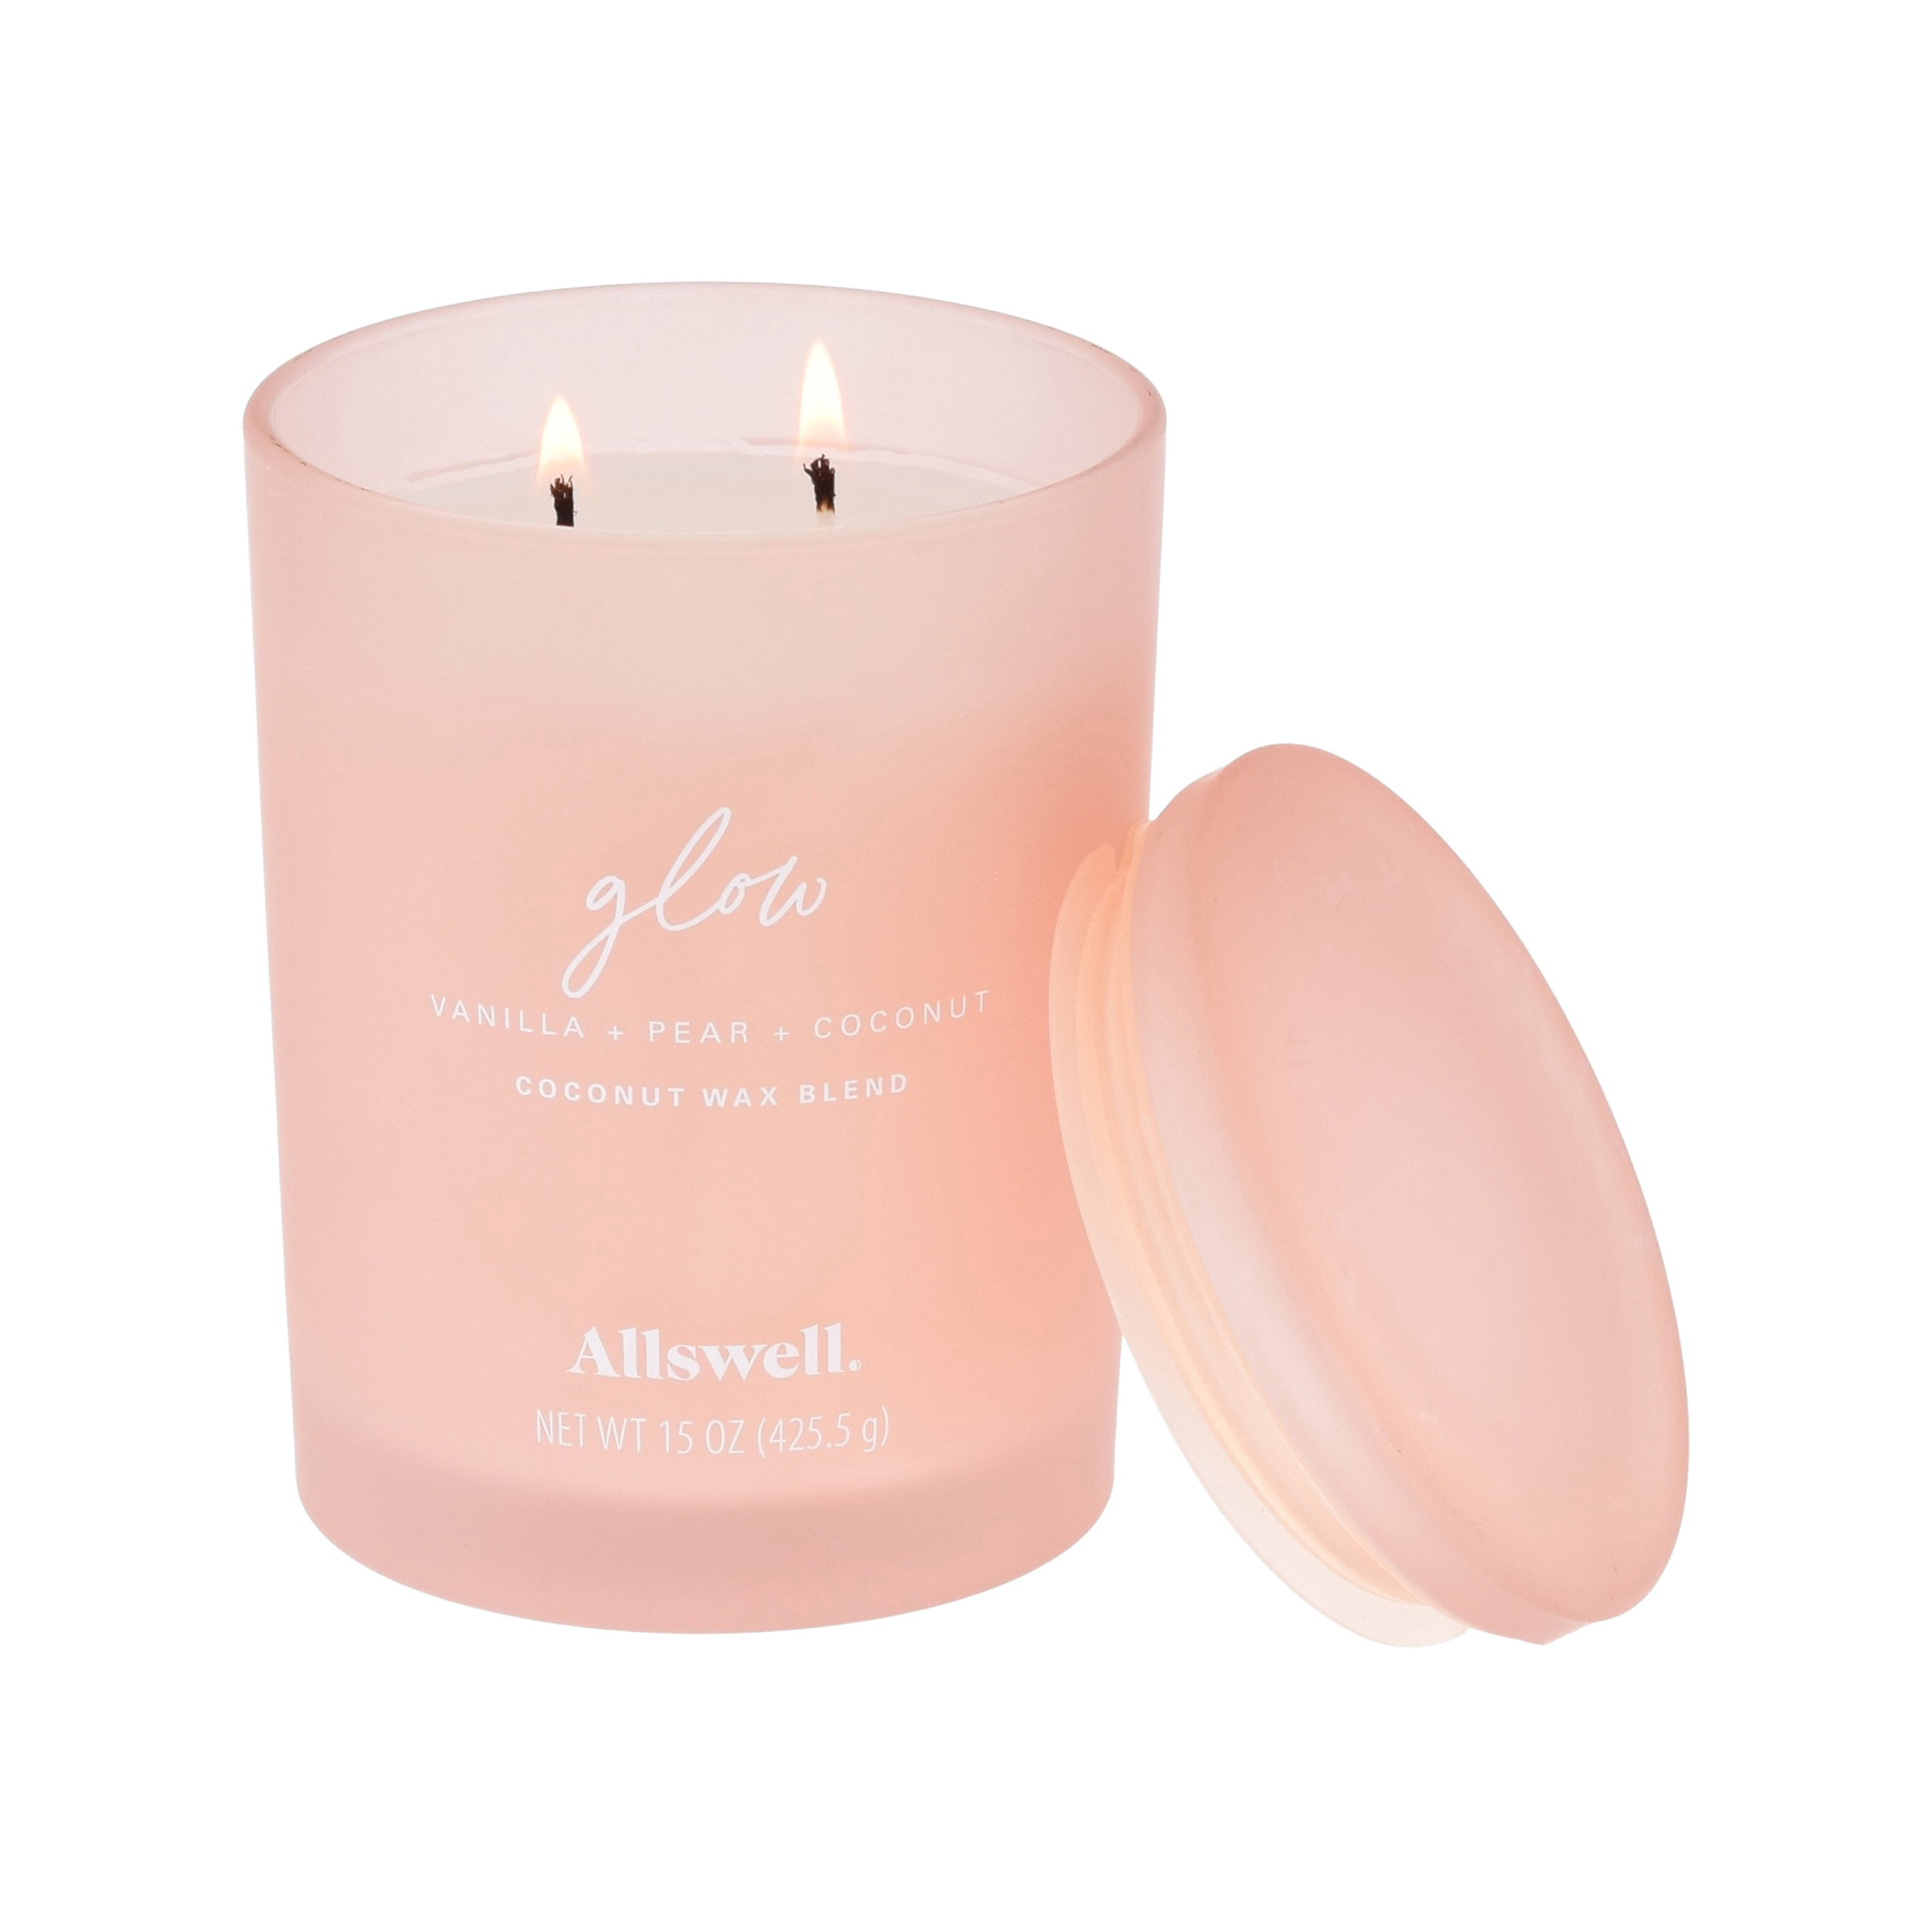 Allswell 15oz Scented 2-Wick Spa Candle - Glow (Vanilla + Pear + Coconut) - image 4 of 4